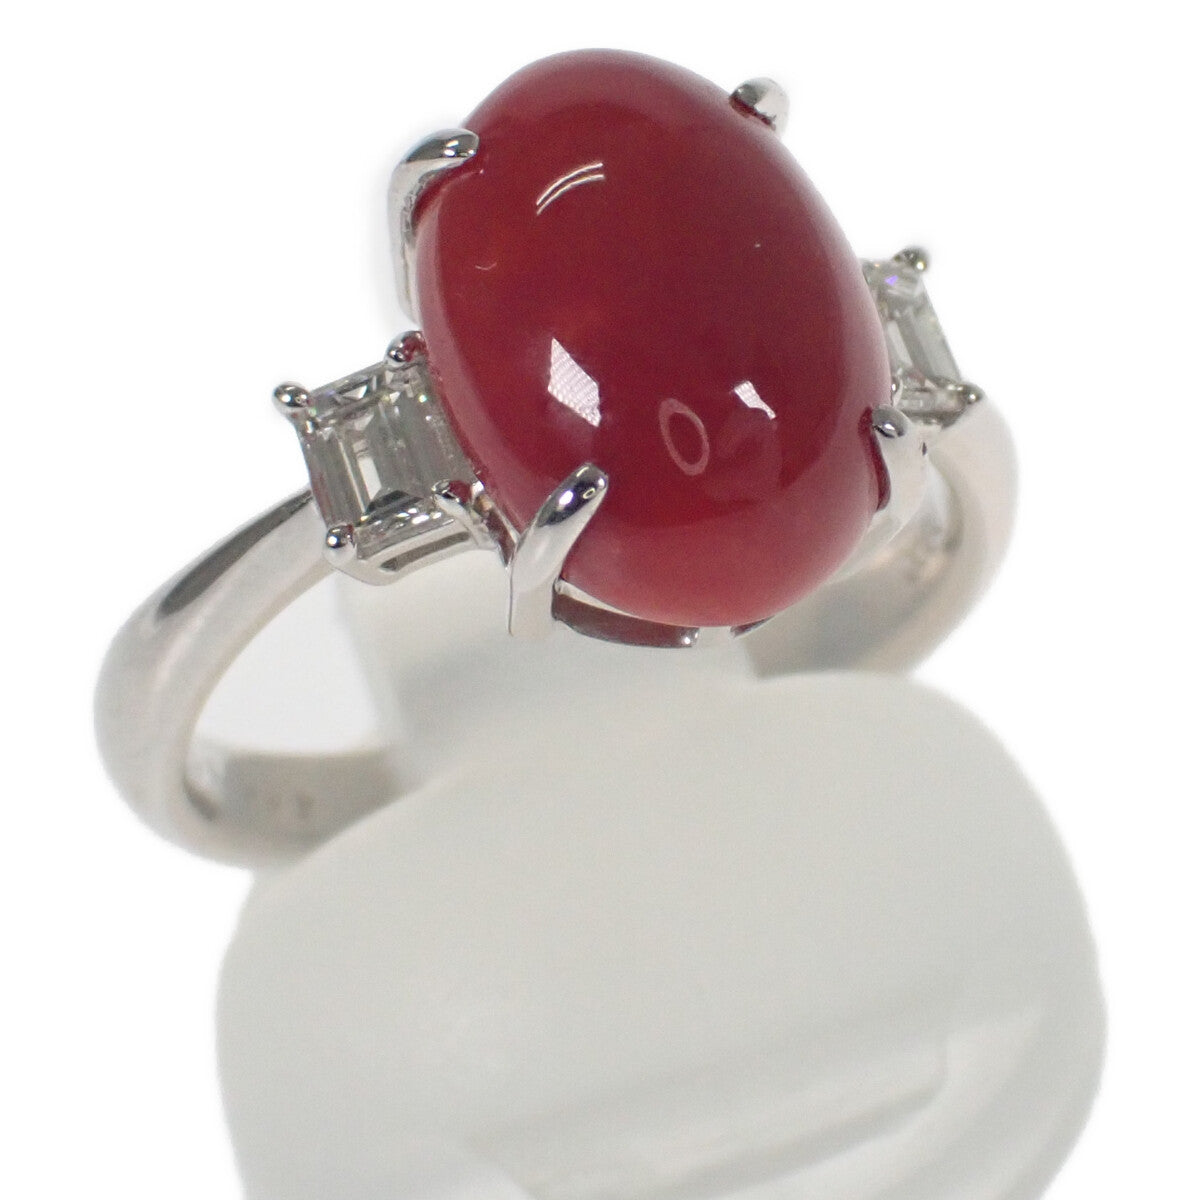 Platinum Pt900 Coral Diamond Ring with 4.46ct Coral and 0.32ct Diamond for Women